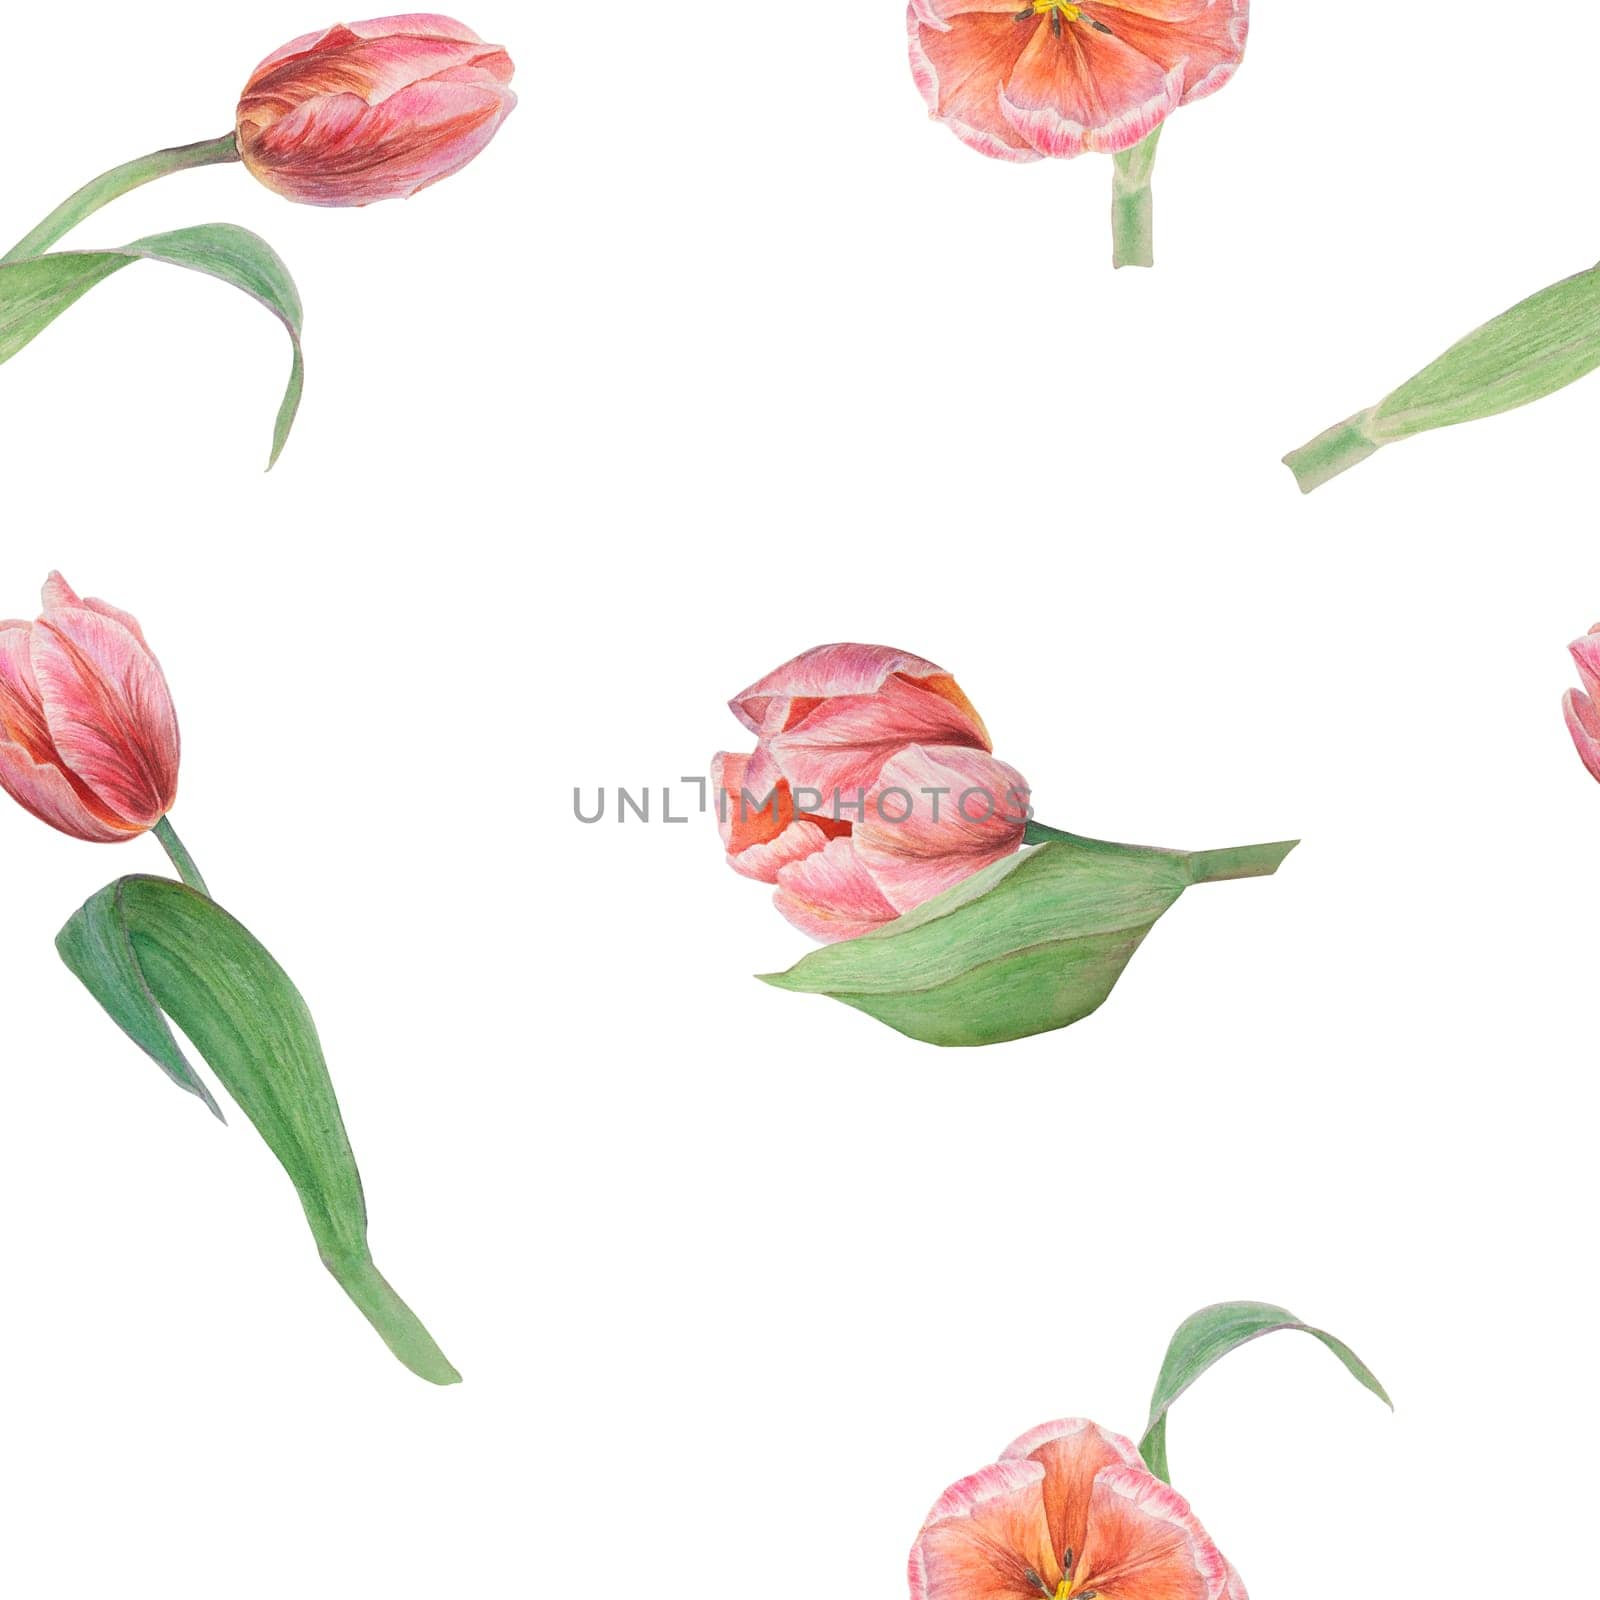 Pink tulips seamless pattern painted in watercolor, realistic botanical hand drawn illustration, background for design, wedding print products, paper, invitations, cards, fabric by florainlove_art